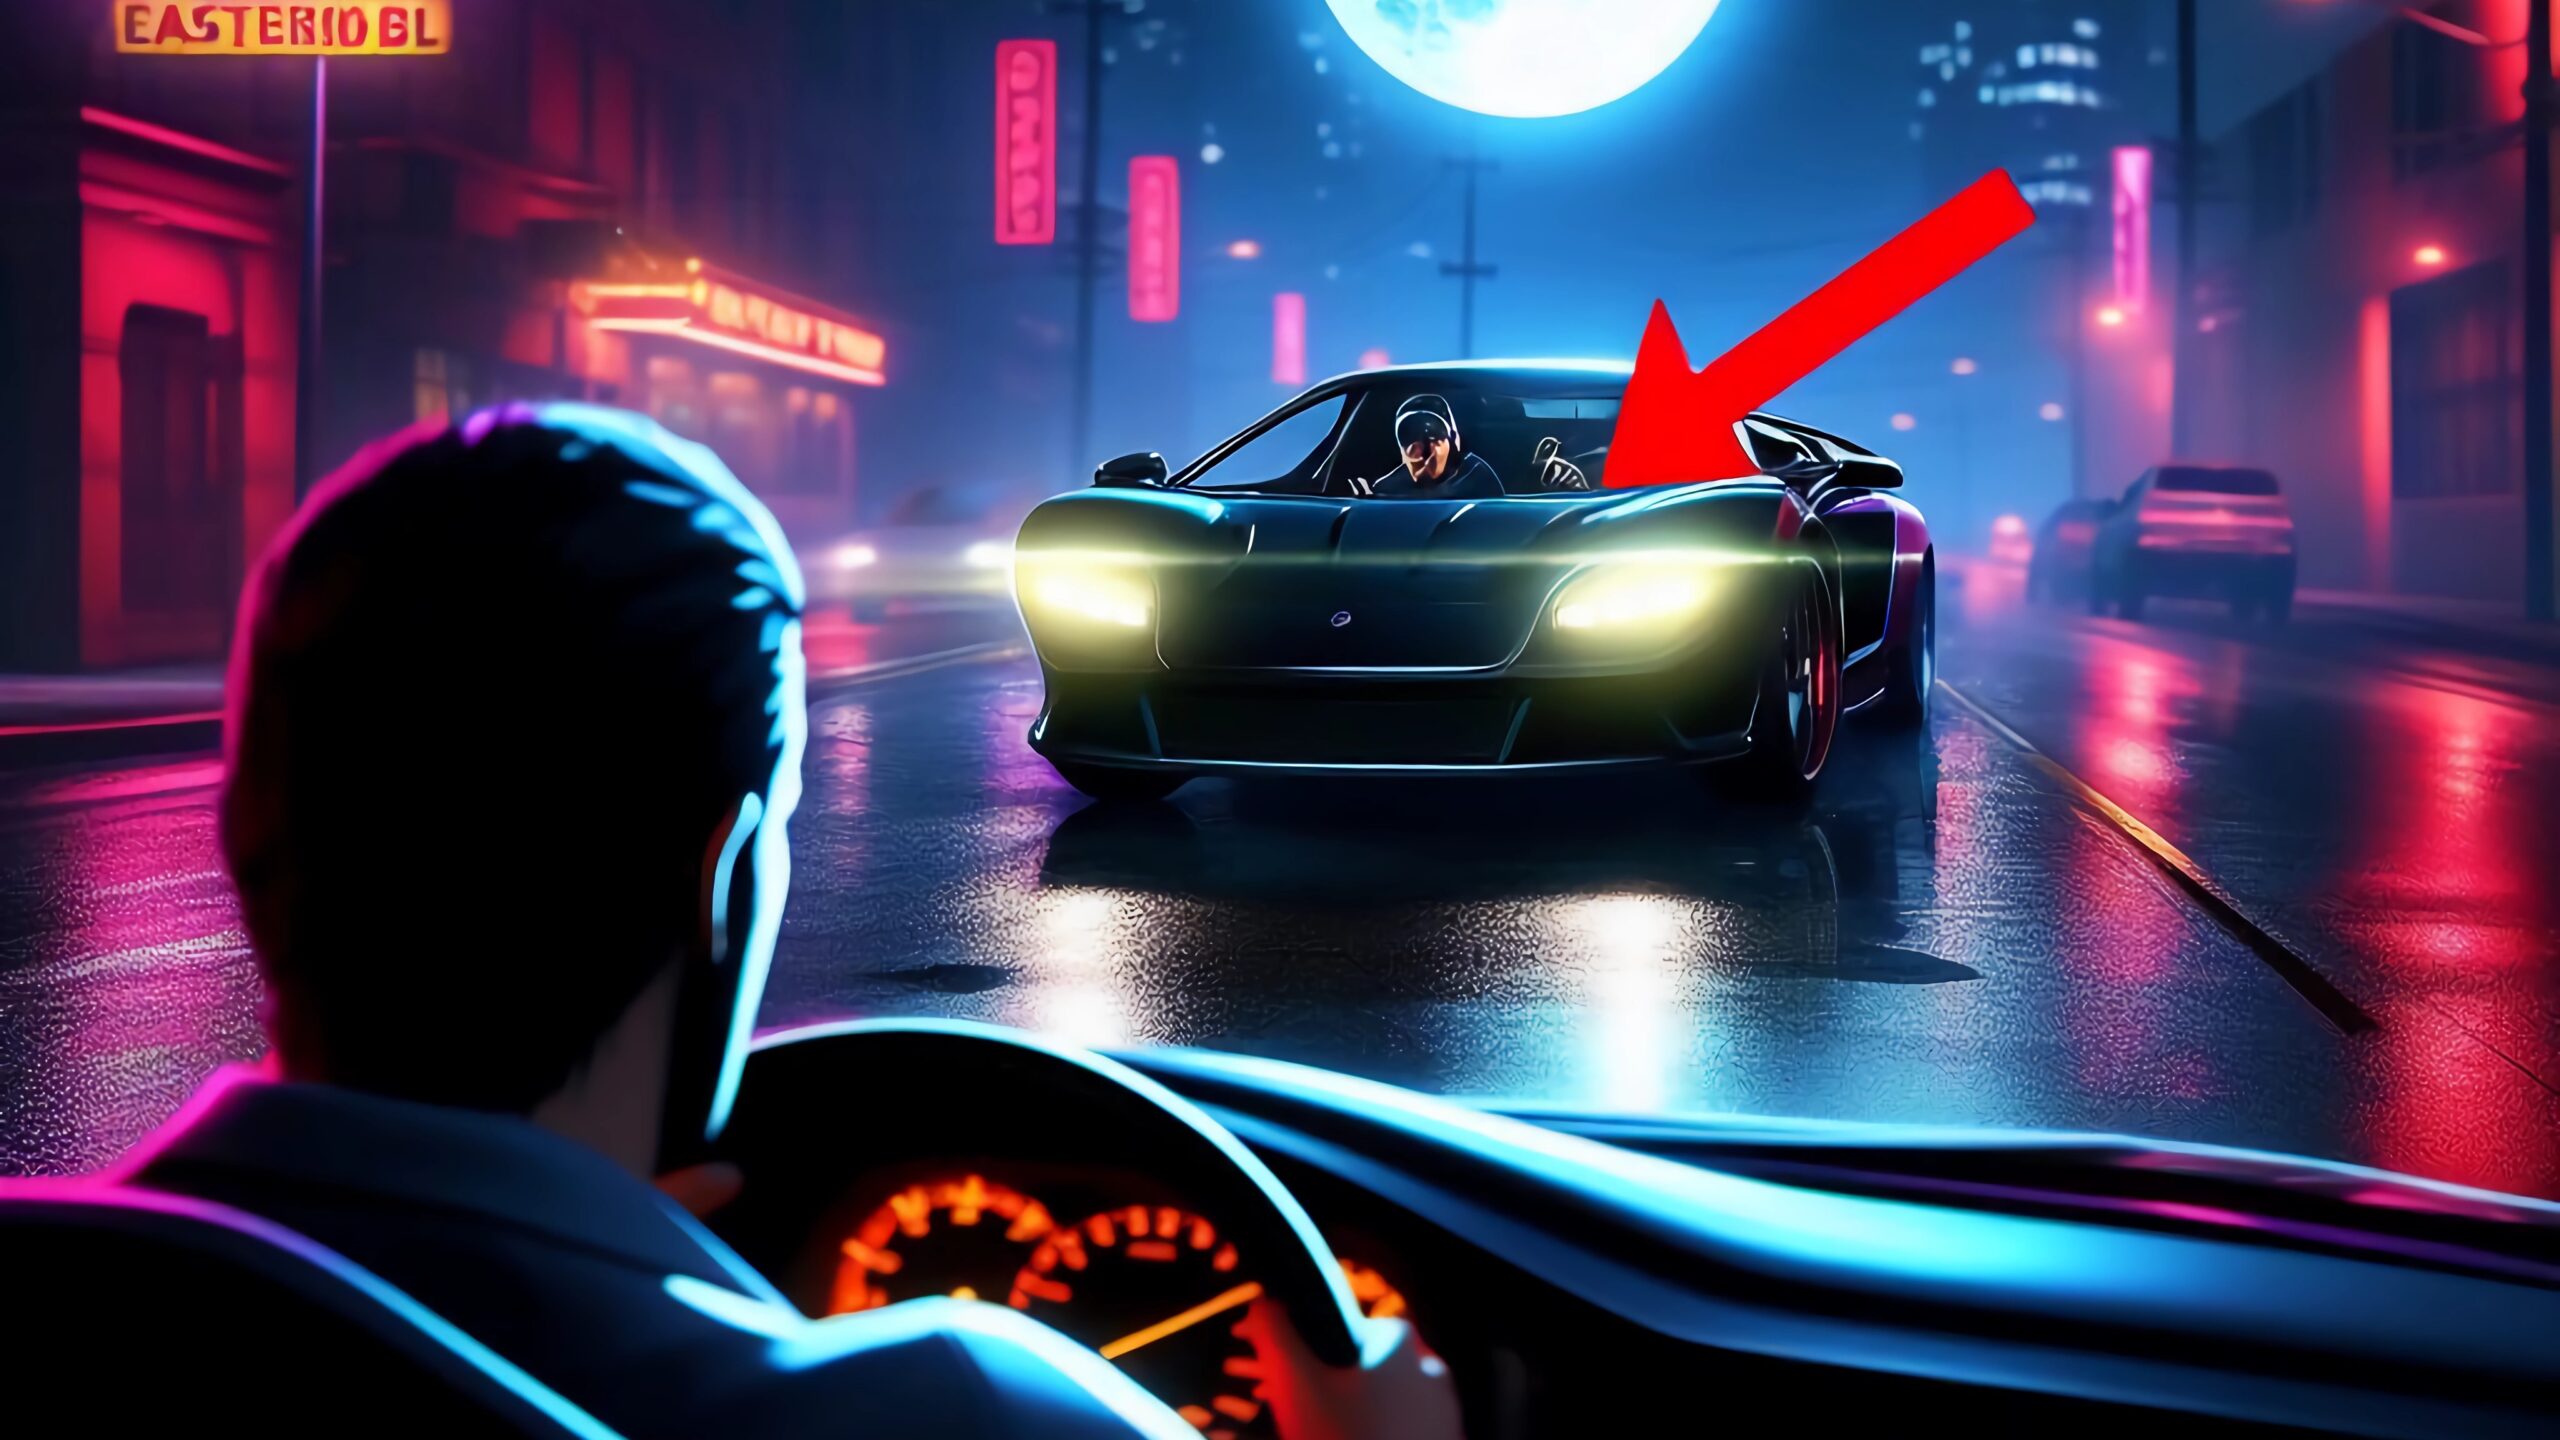 Grand Theft Auto VI: A Neon-Soaked Dream (or Nightmare) Worth Waiting For